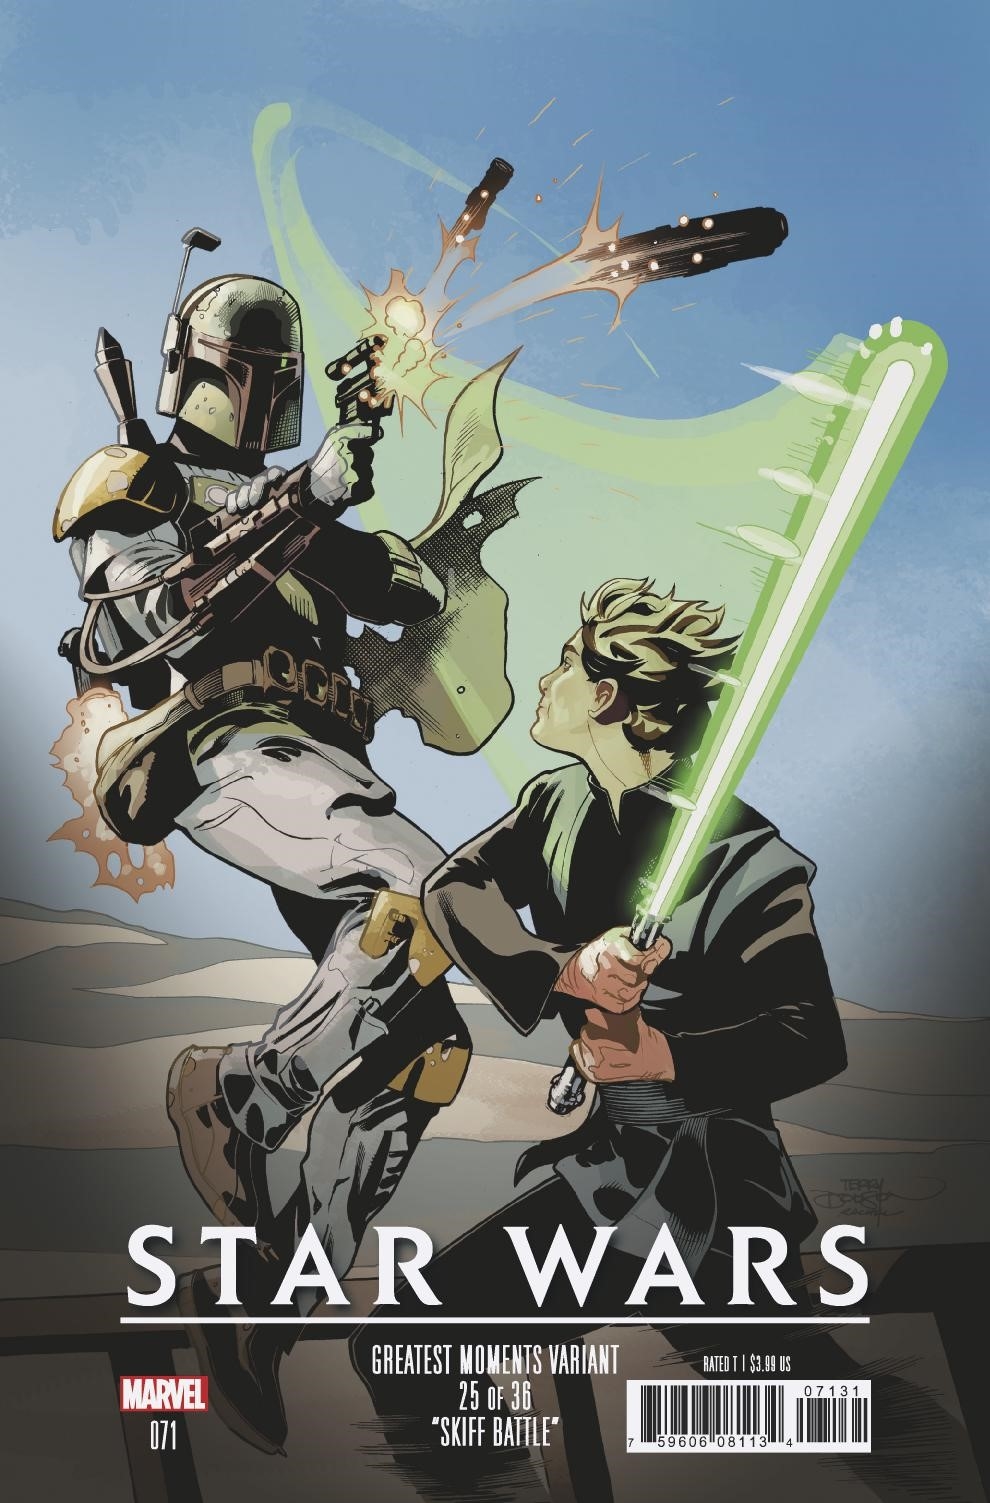 Star Wars #71 (Terry Dodson Greatest Moments Variant Cover 25 of 36) (04.09.2019)